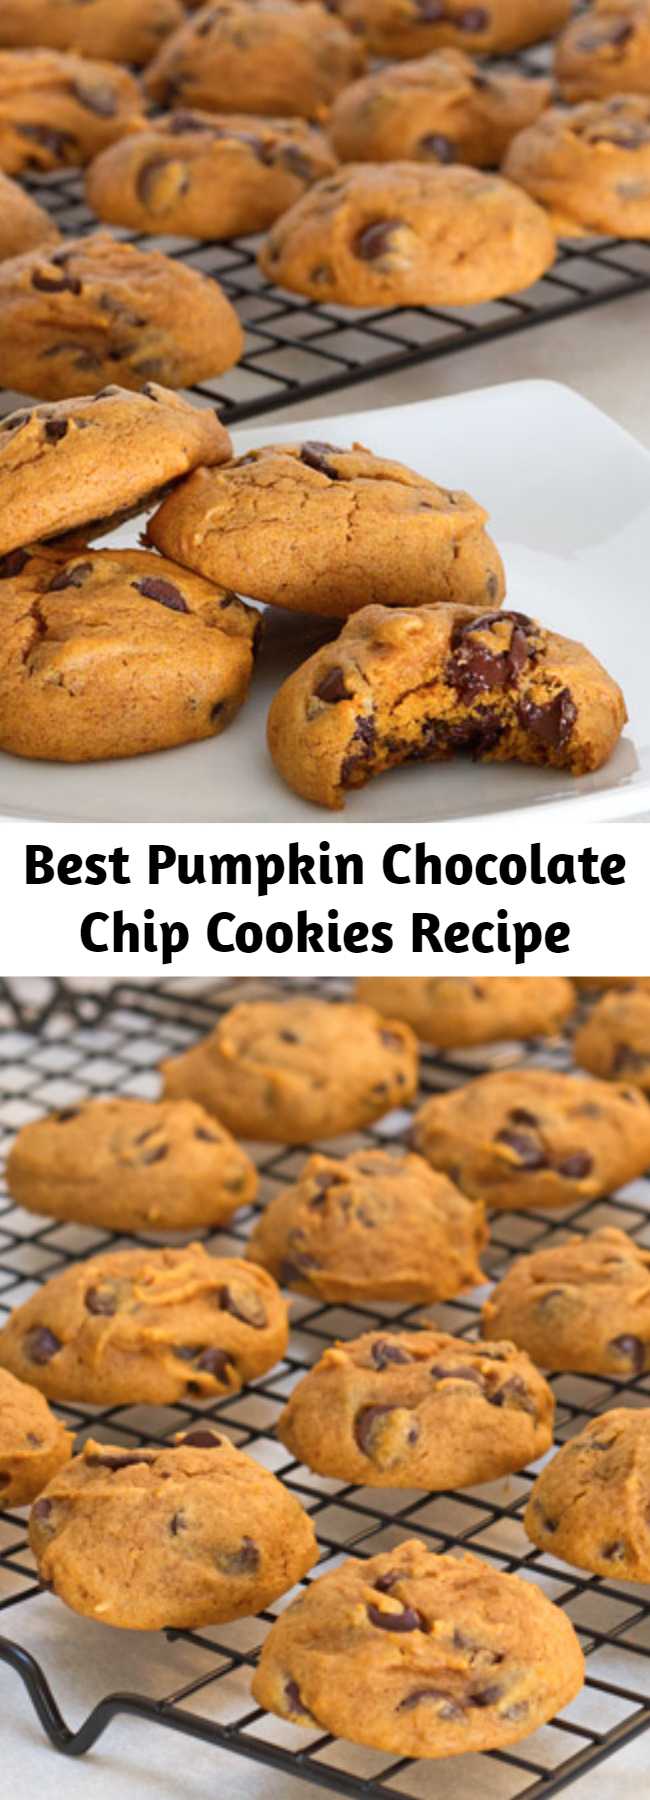 Best Pumpkin Chocolate Chip Cookies Recipe - These pumpkin chocolate chip cookies are the essential fall cookie! Chewy and cake-like, they're sure to be a hit at your next tailgate or fall party!